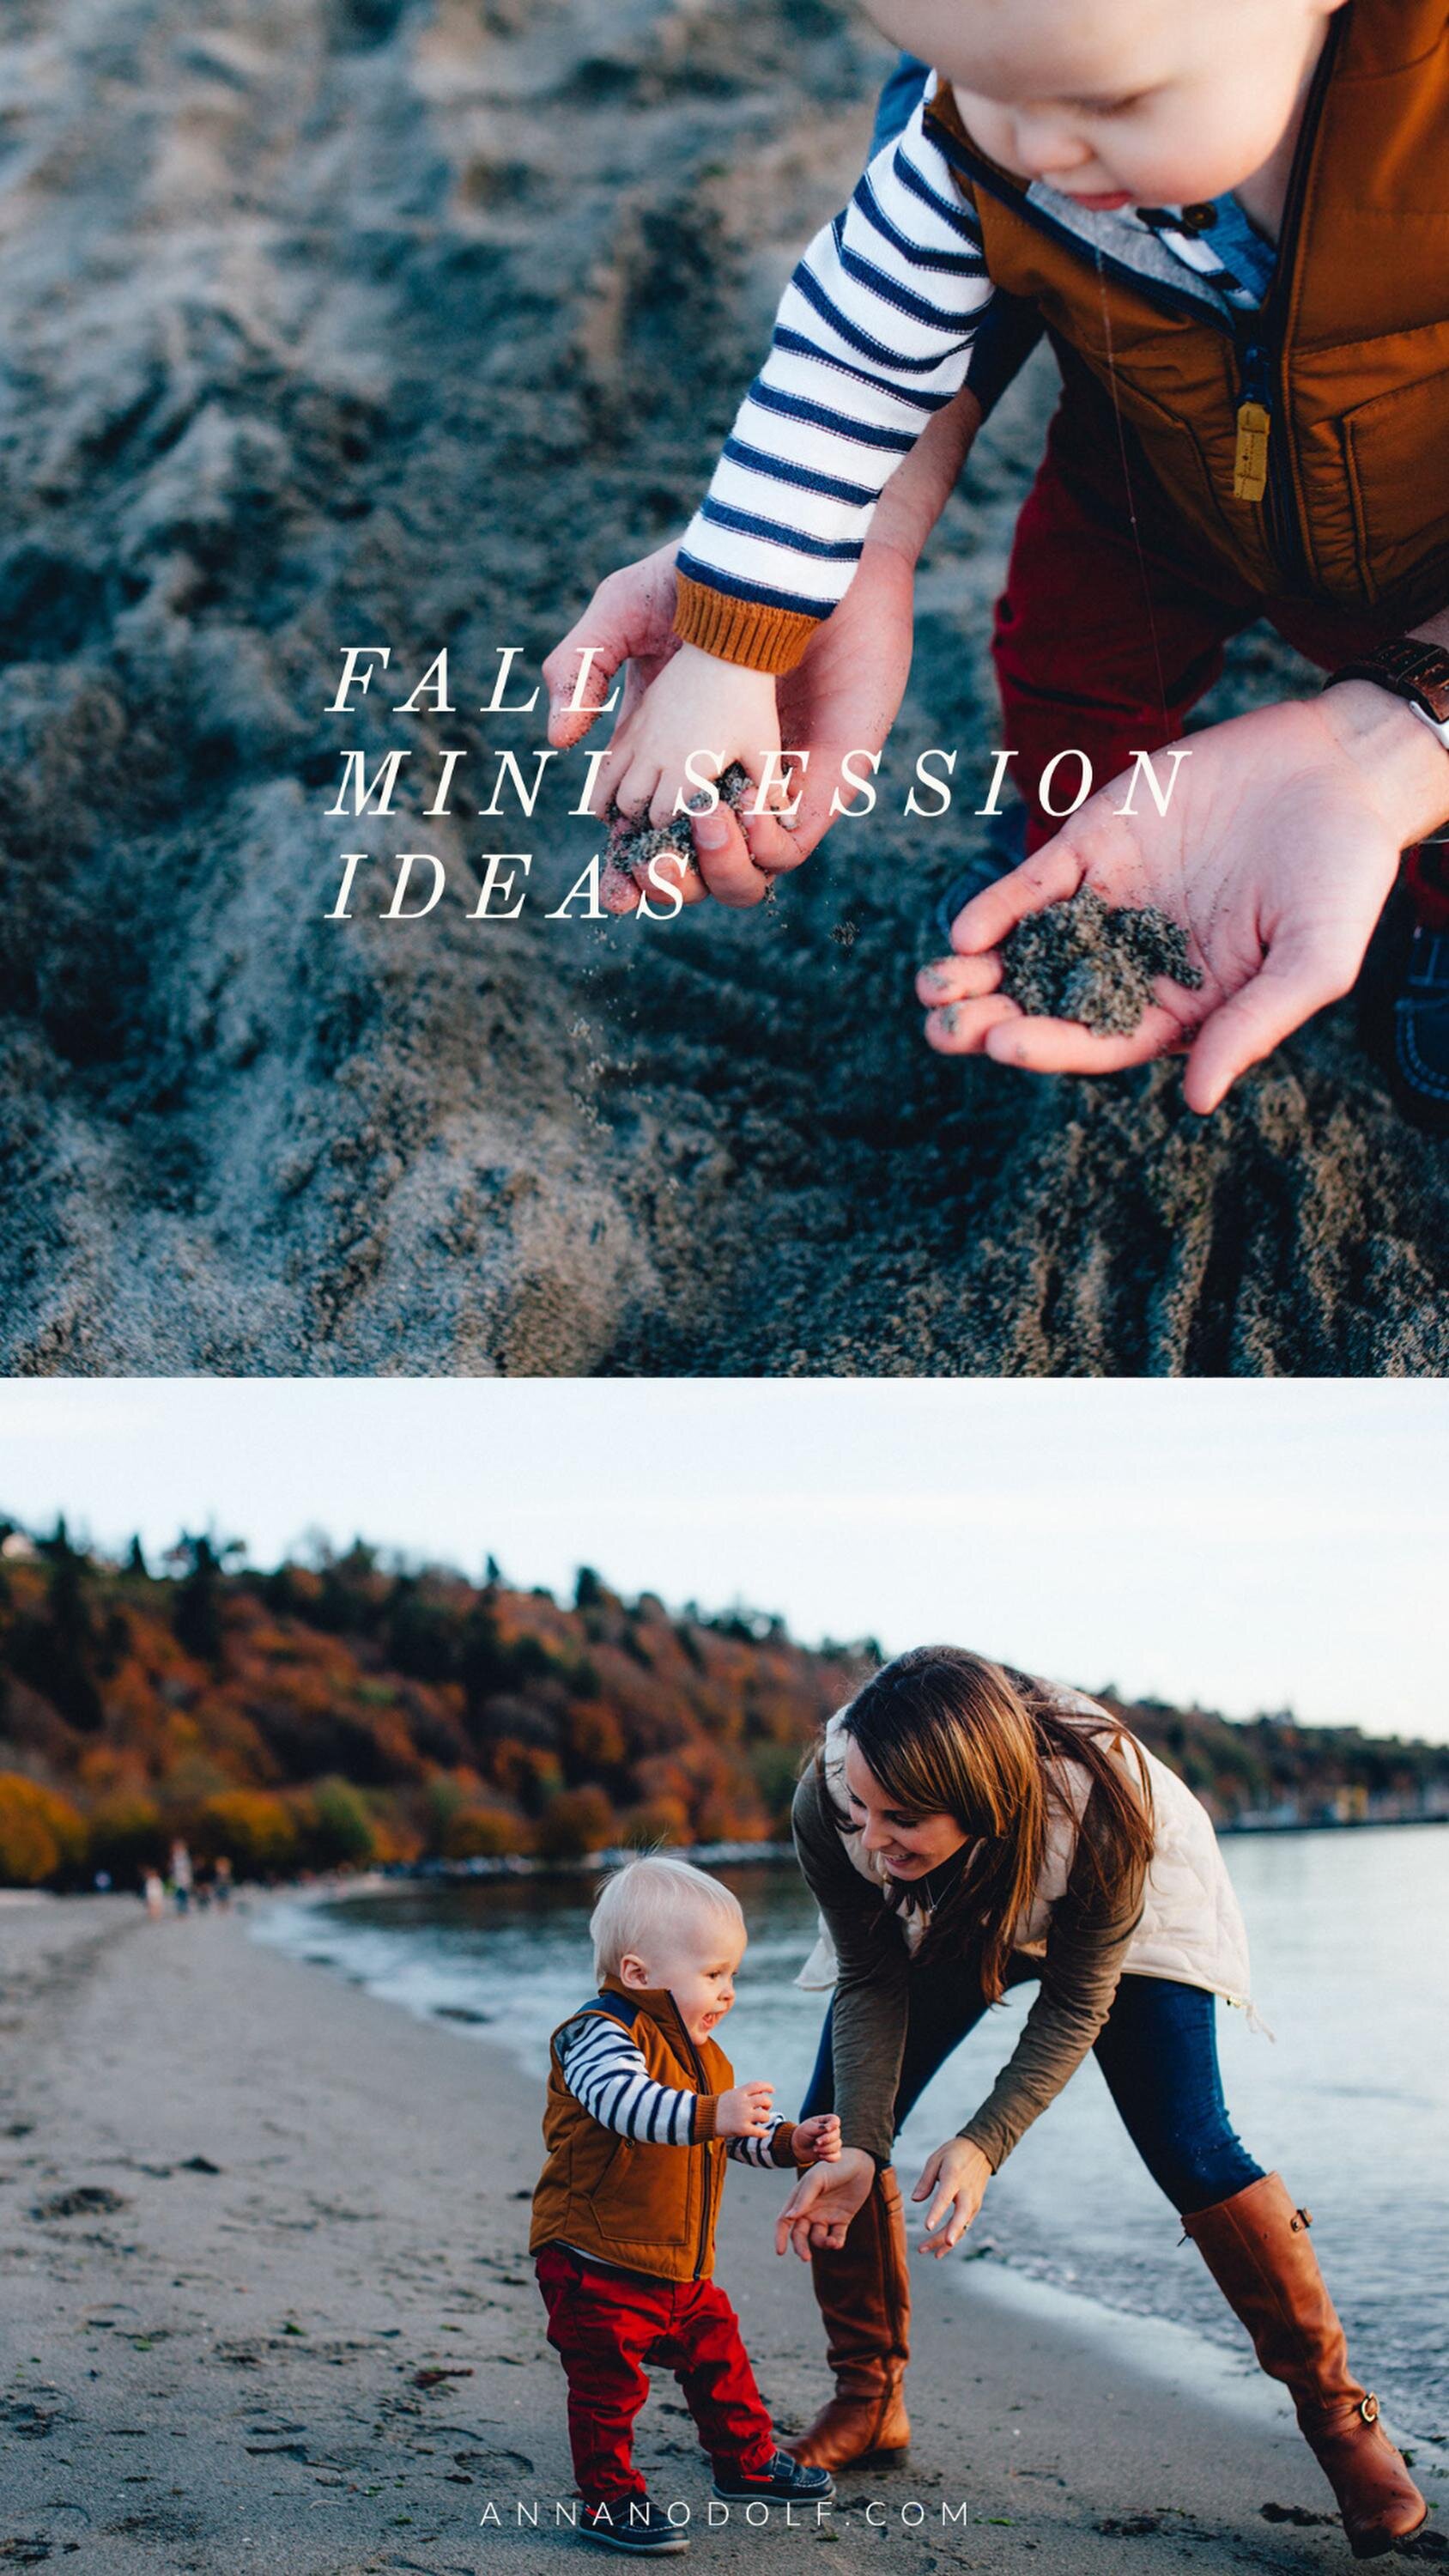 seattle lifestyle photographer - the best mini sessions in seattle